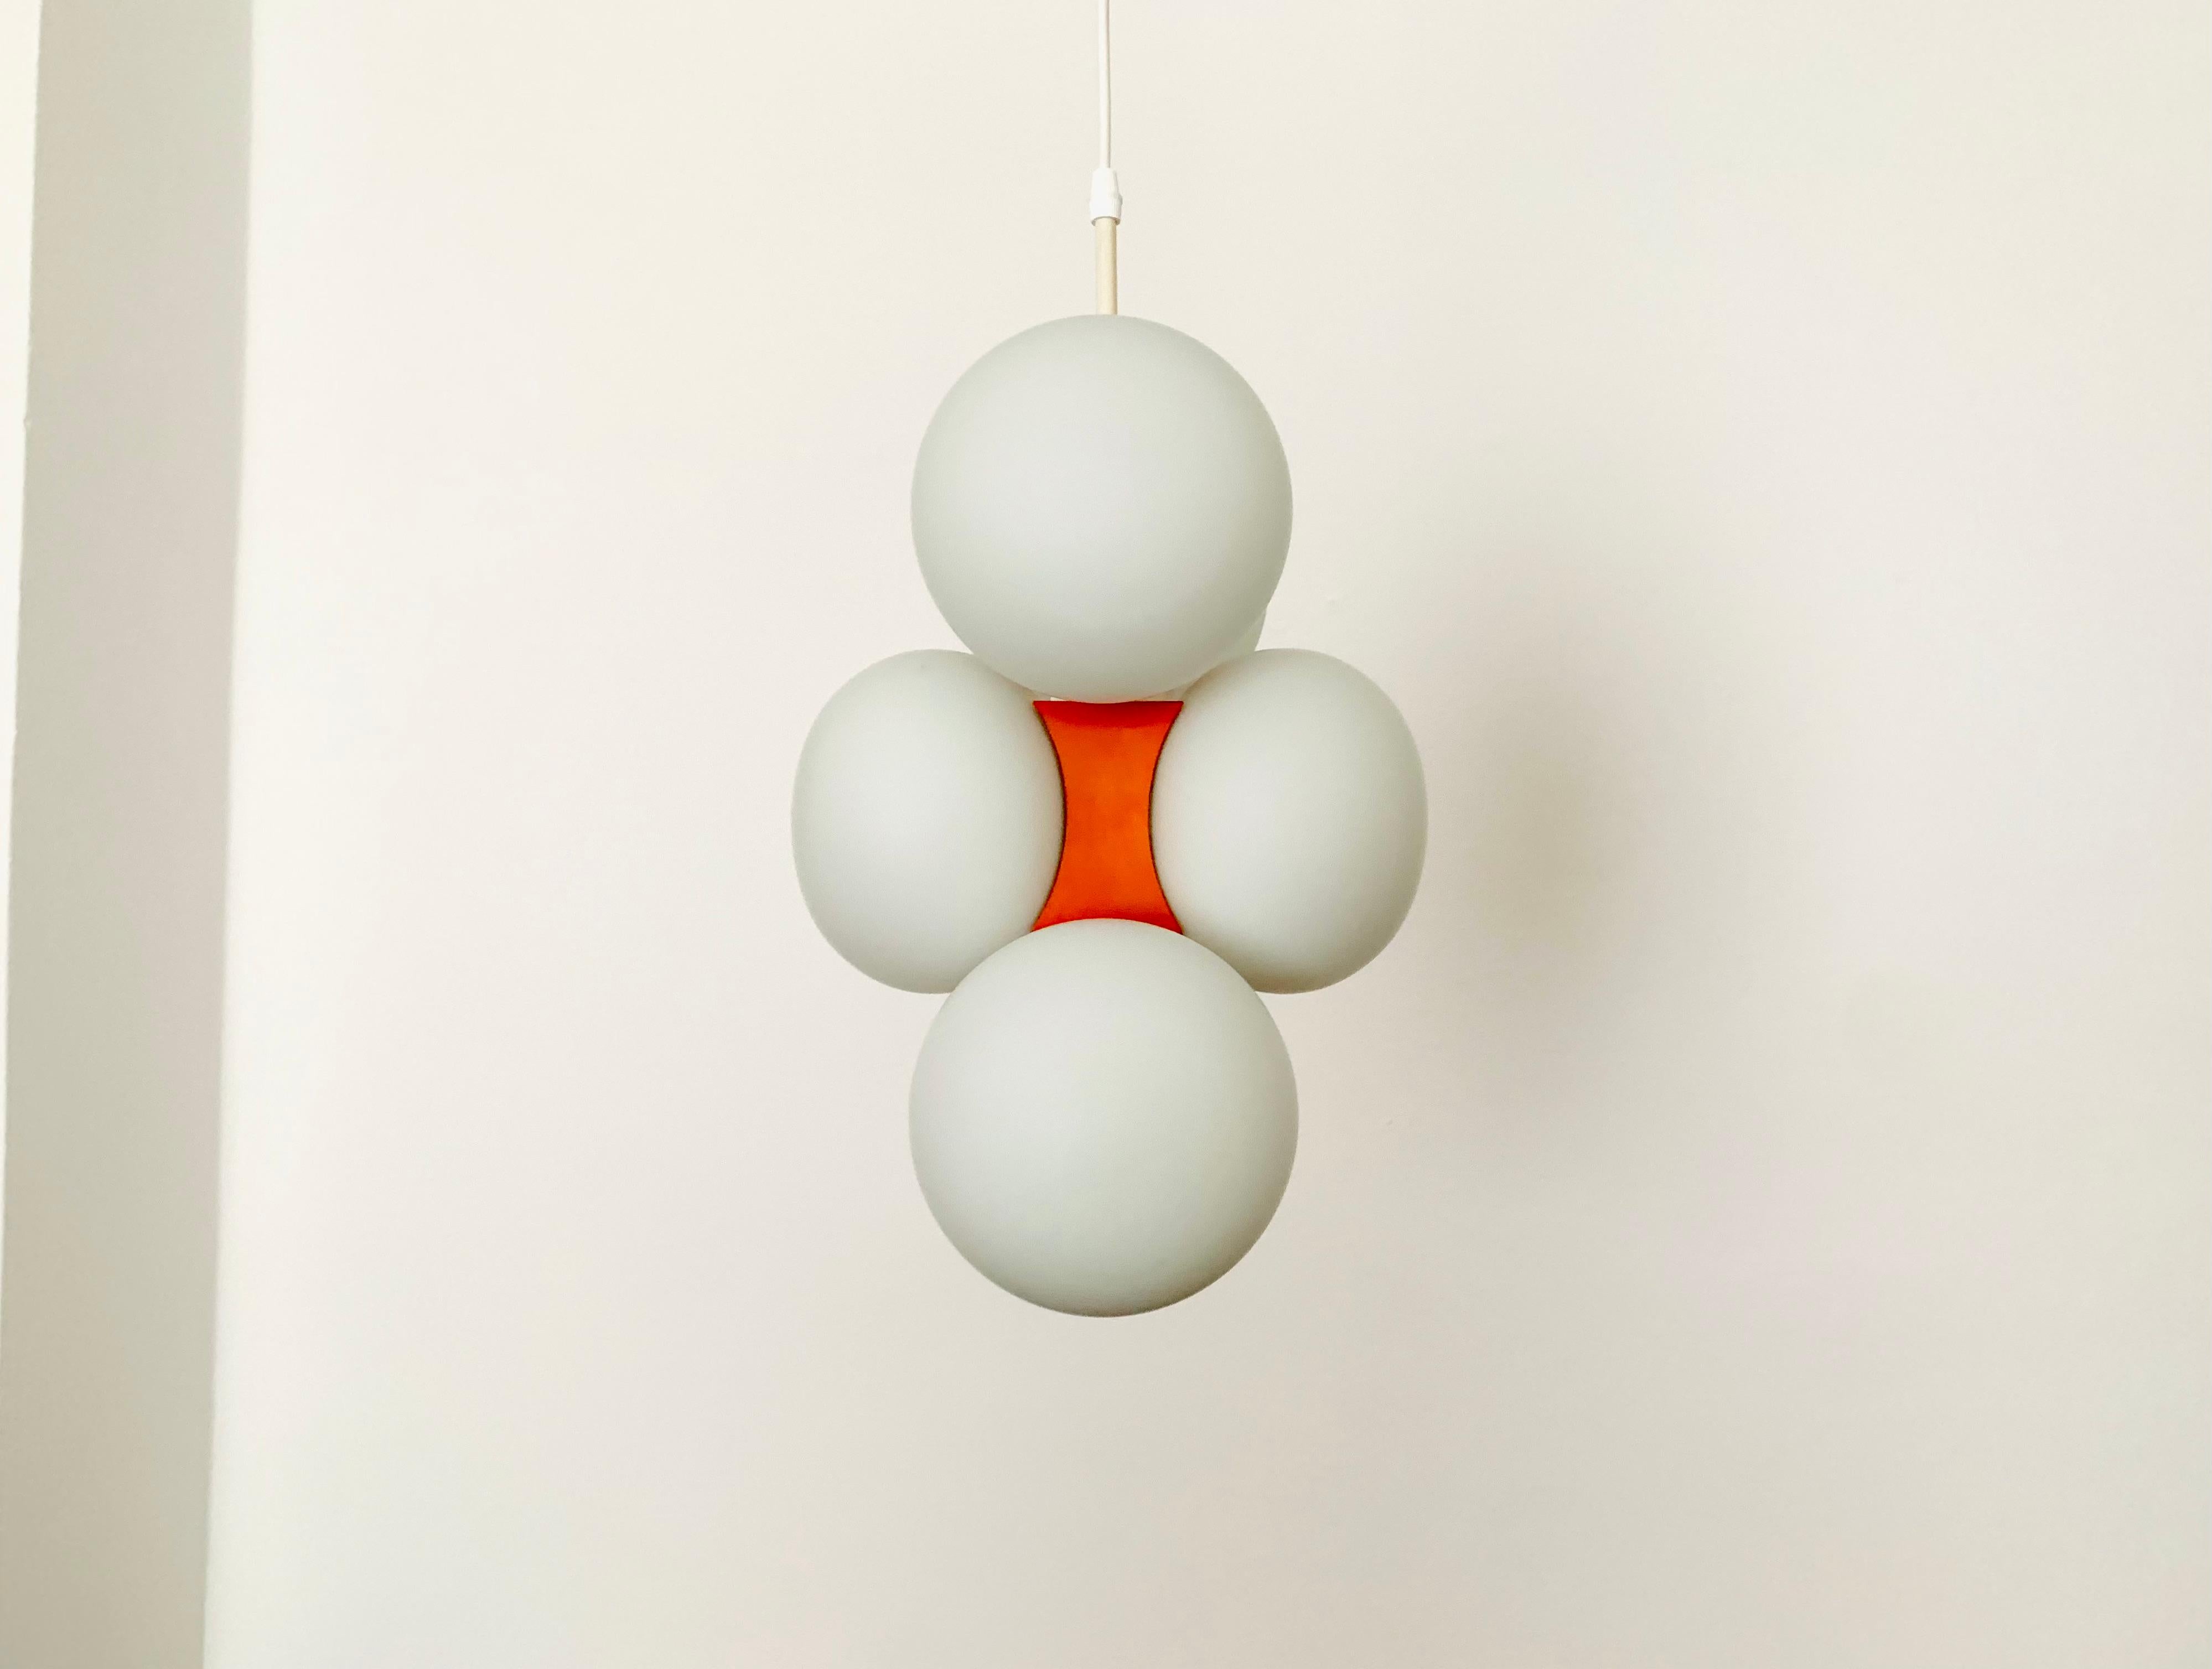 Wonderful sputnik pendant lamp from the 1960s.
The 6 opal glass lampshades spread a pleasant light.
The lamp has a very high quality finish.
Very contemporary design with a fantastic look.

Manufacturer: Kaiser lights.

Condition:

Very